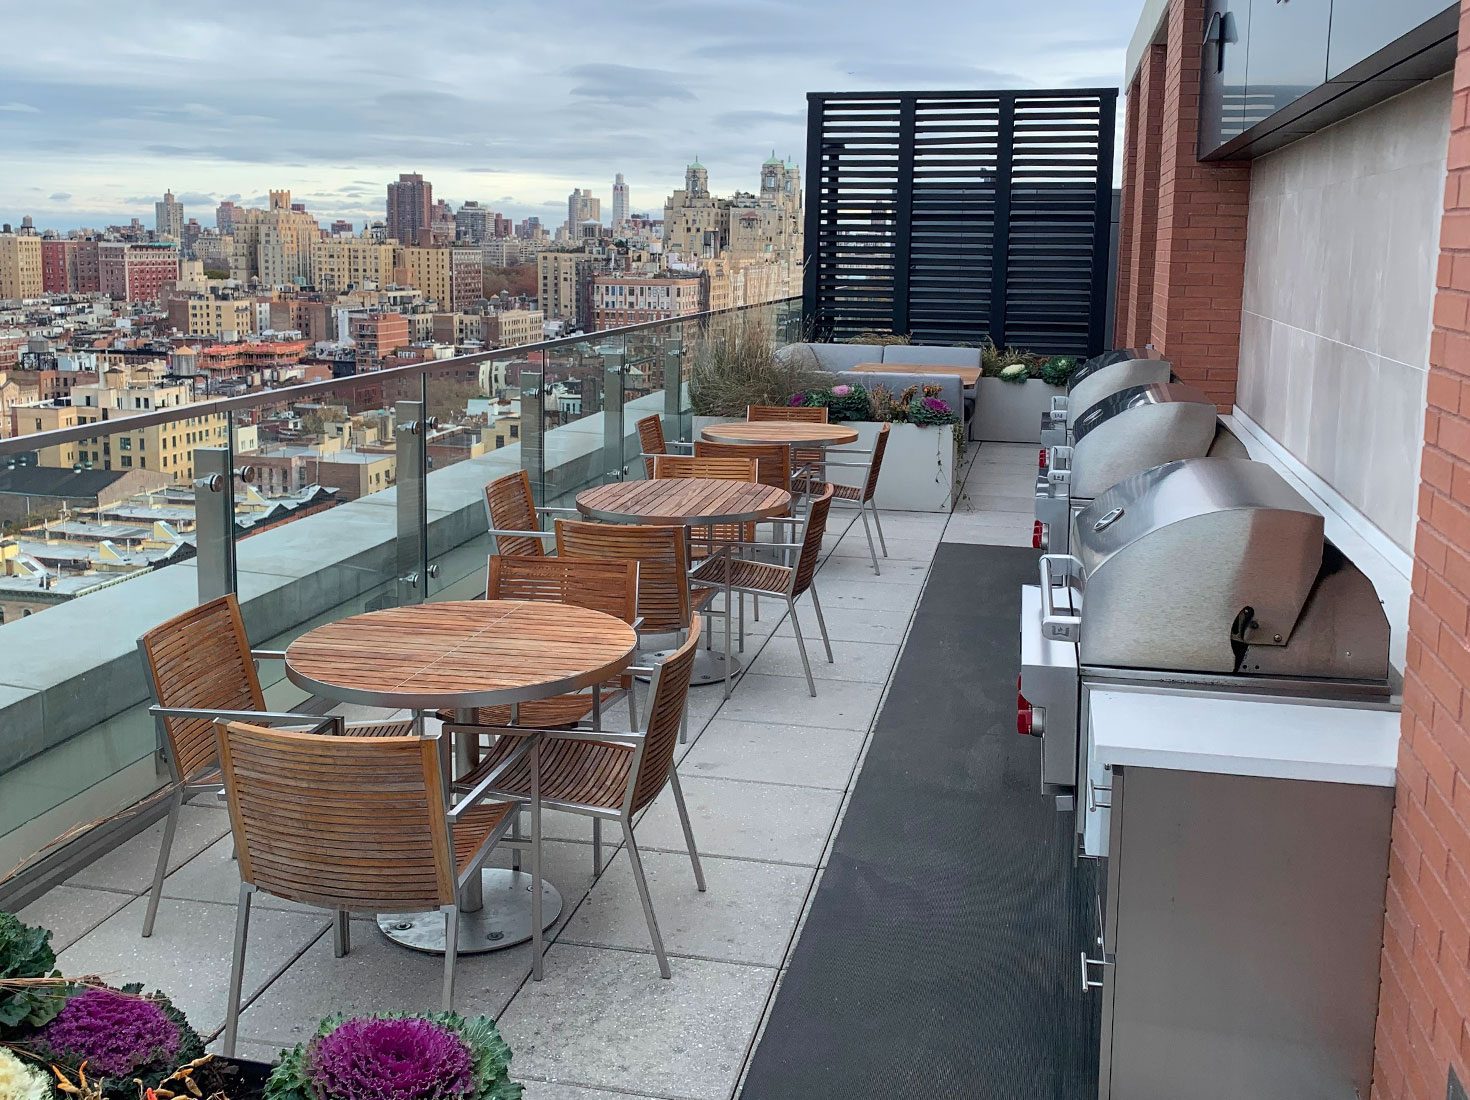 A rooftop with tables, chairs, and grills that overlooks New York City